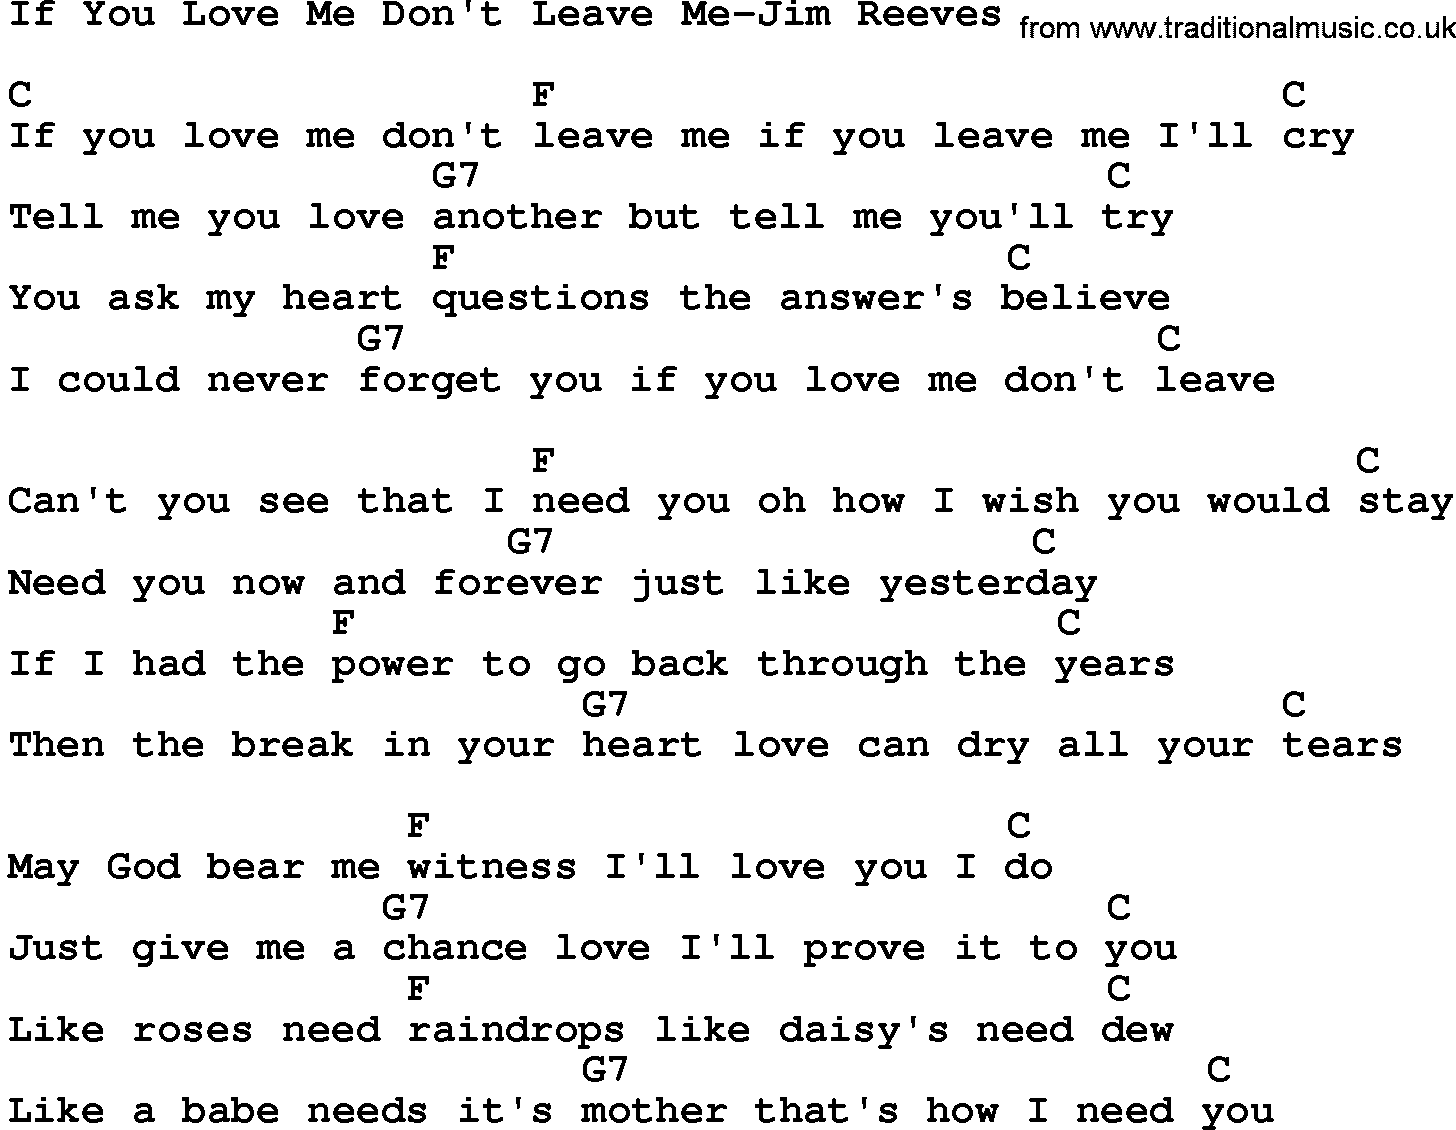 Country music song: If You Love Me Don't Leave Me-Jim Reeves lyrics and chords